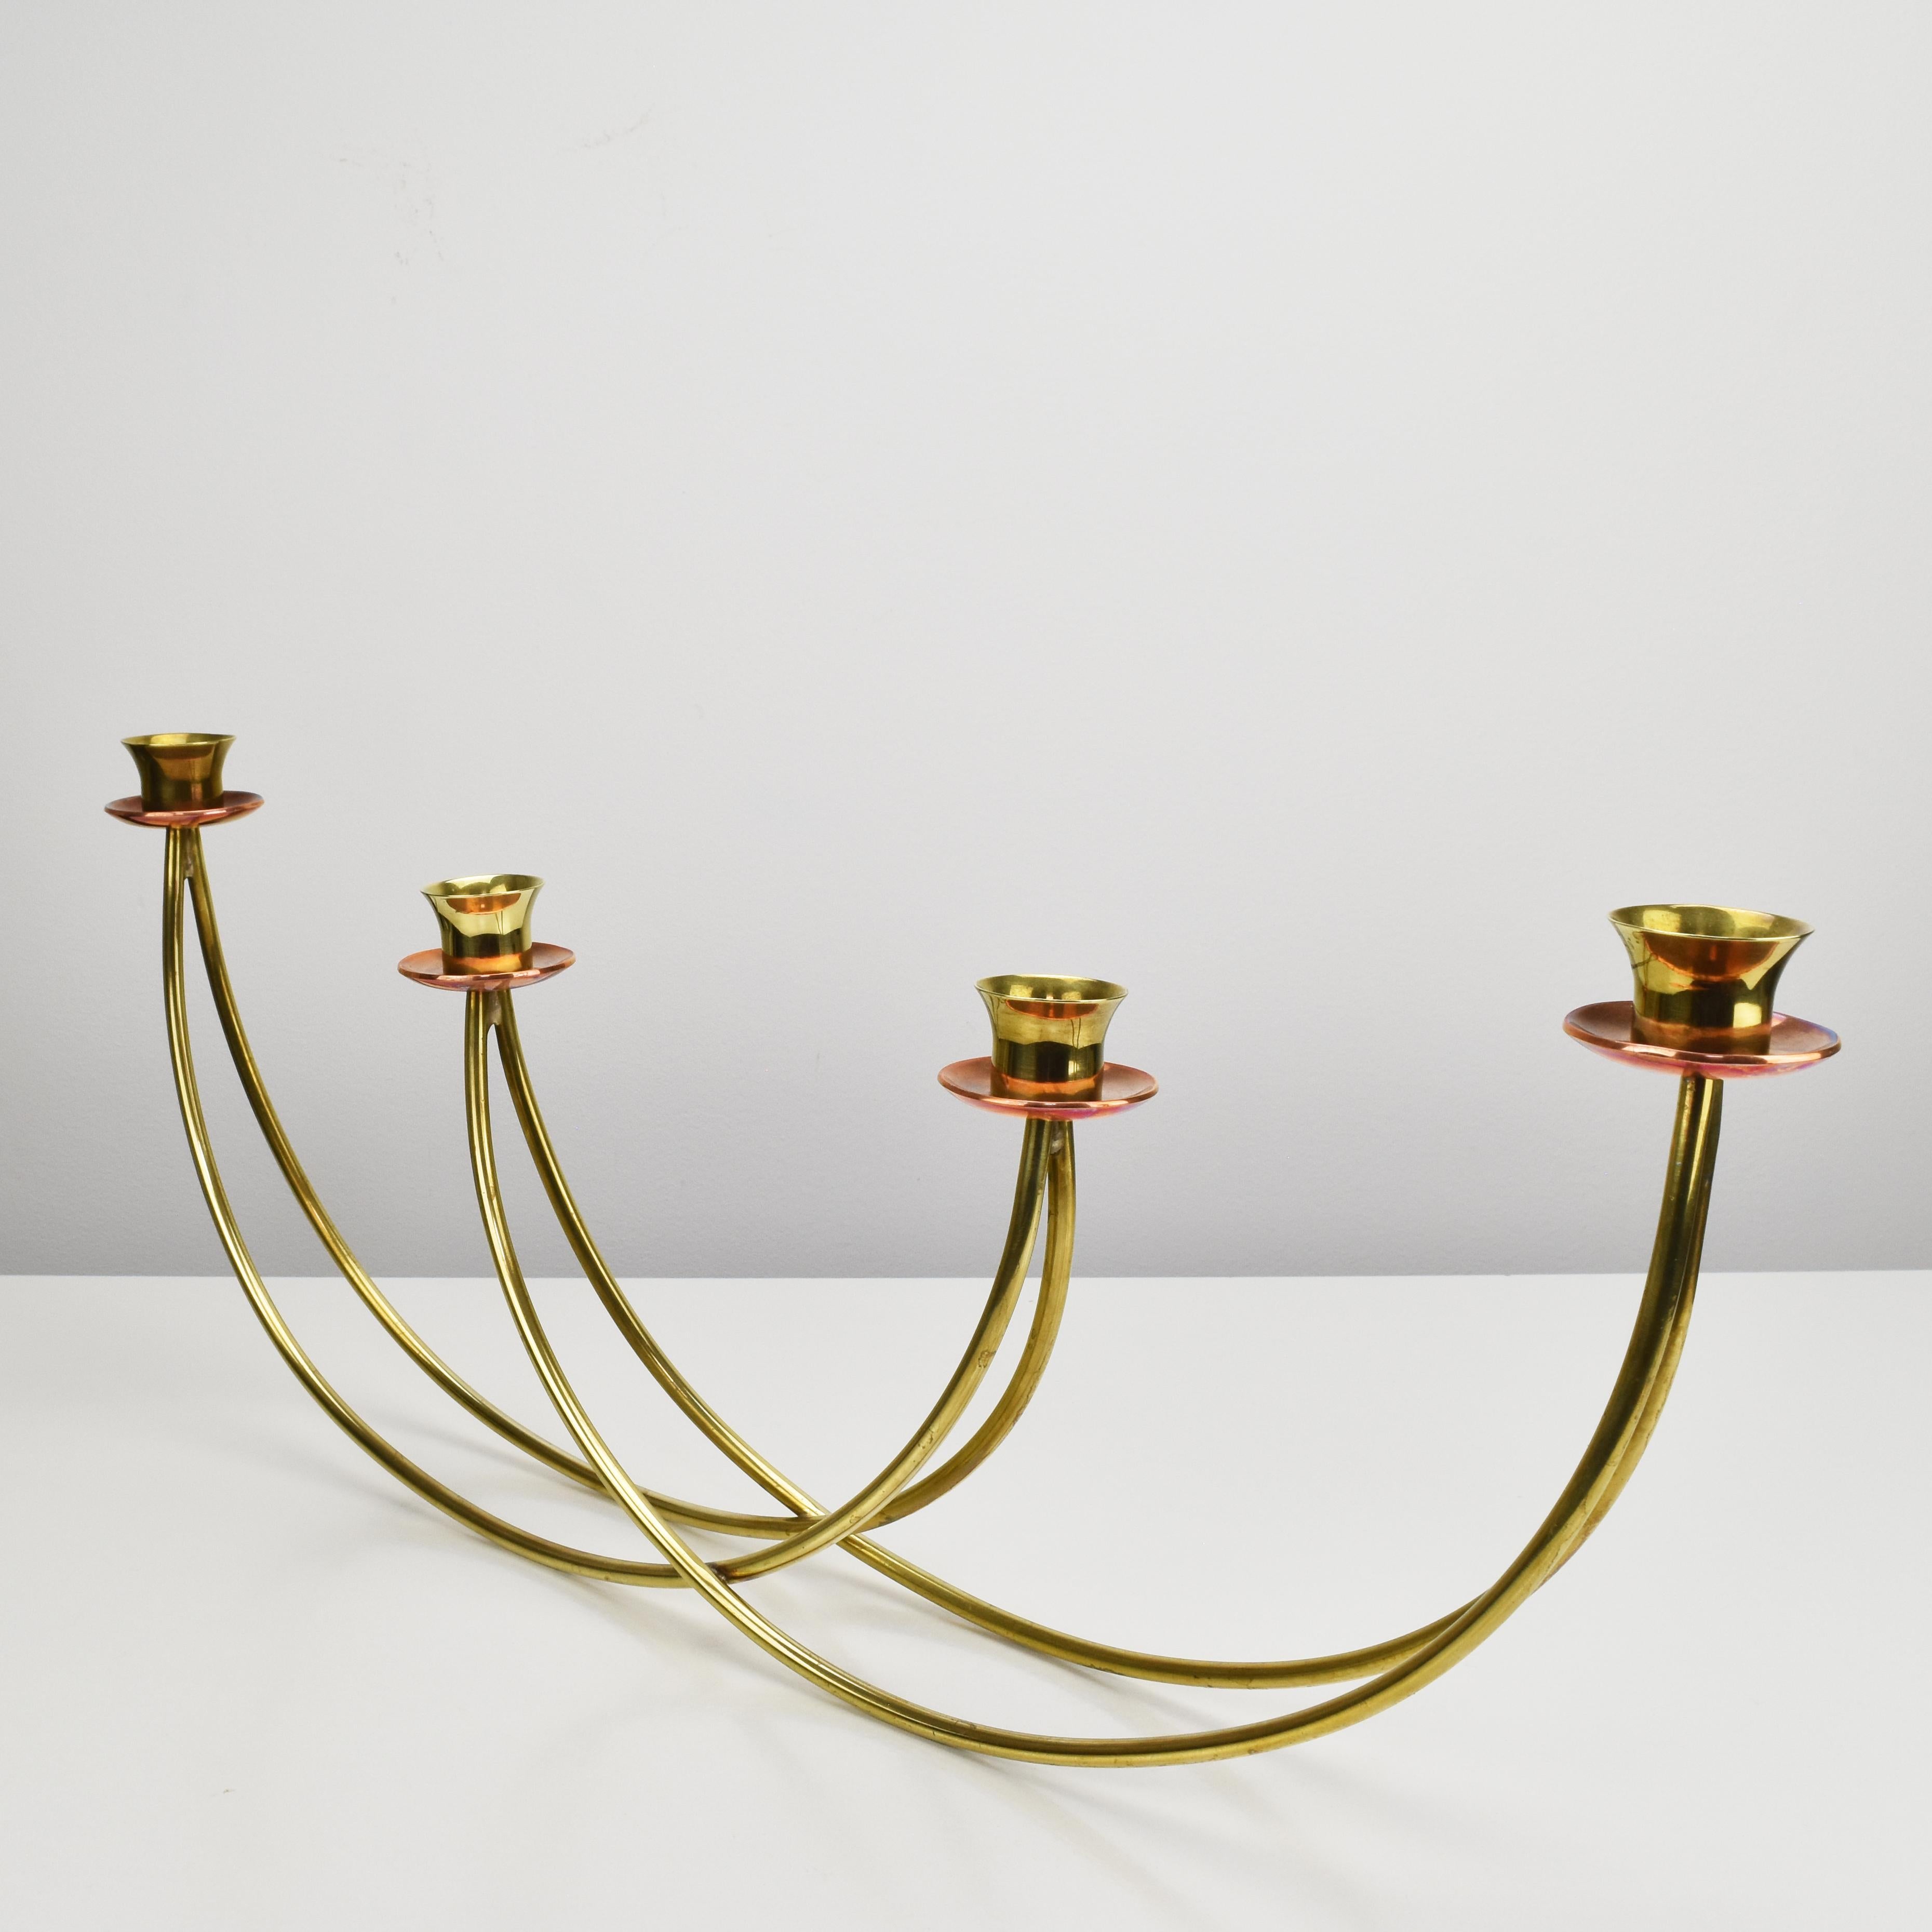 Minimalistic designed candle holder for four candles made of solid brass with copper drip trays attributed to Harald Buchrucker dating to the 1940s.